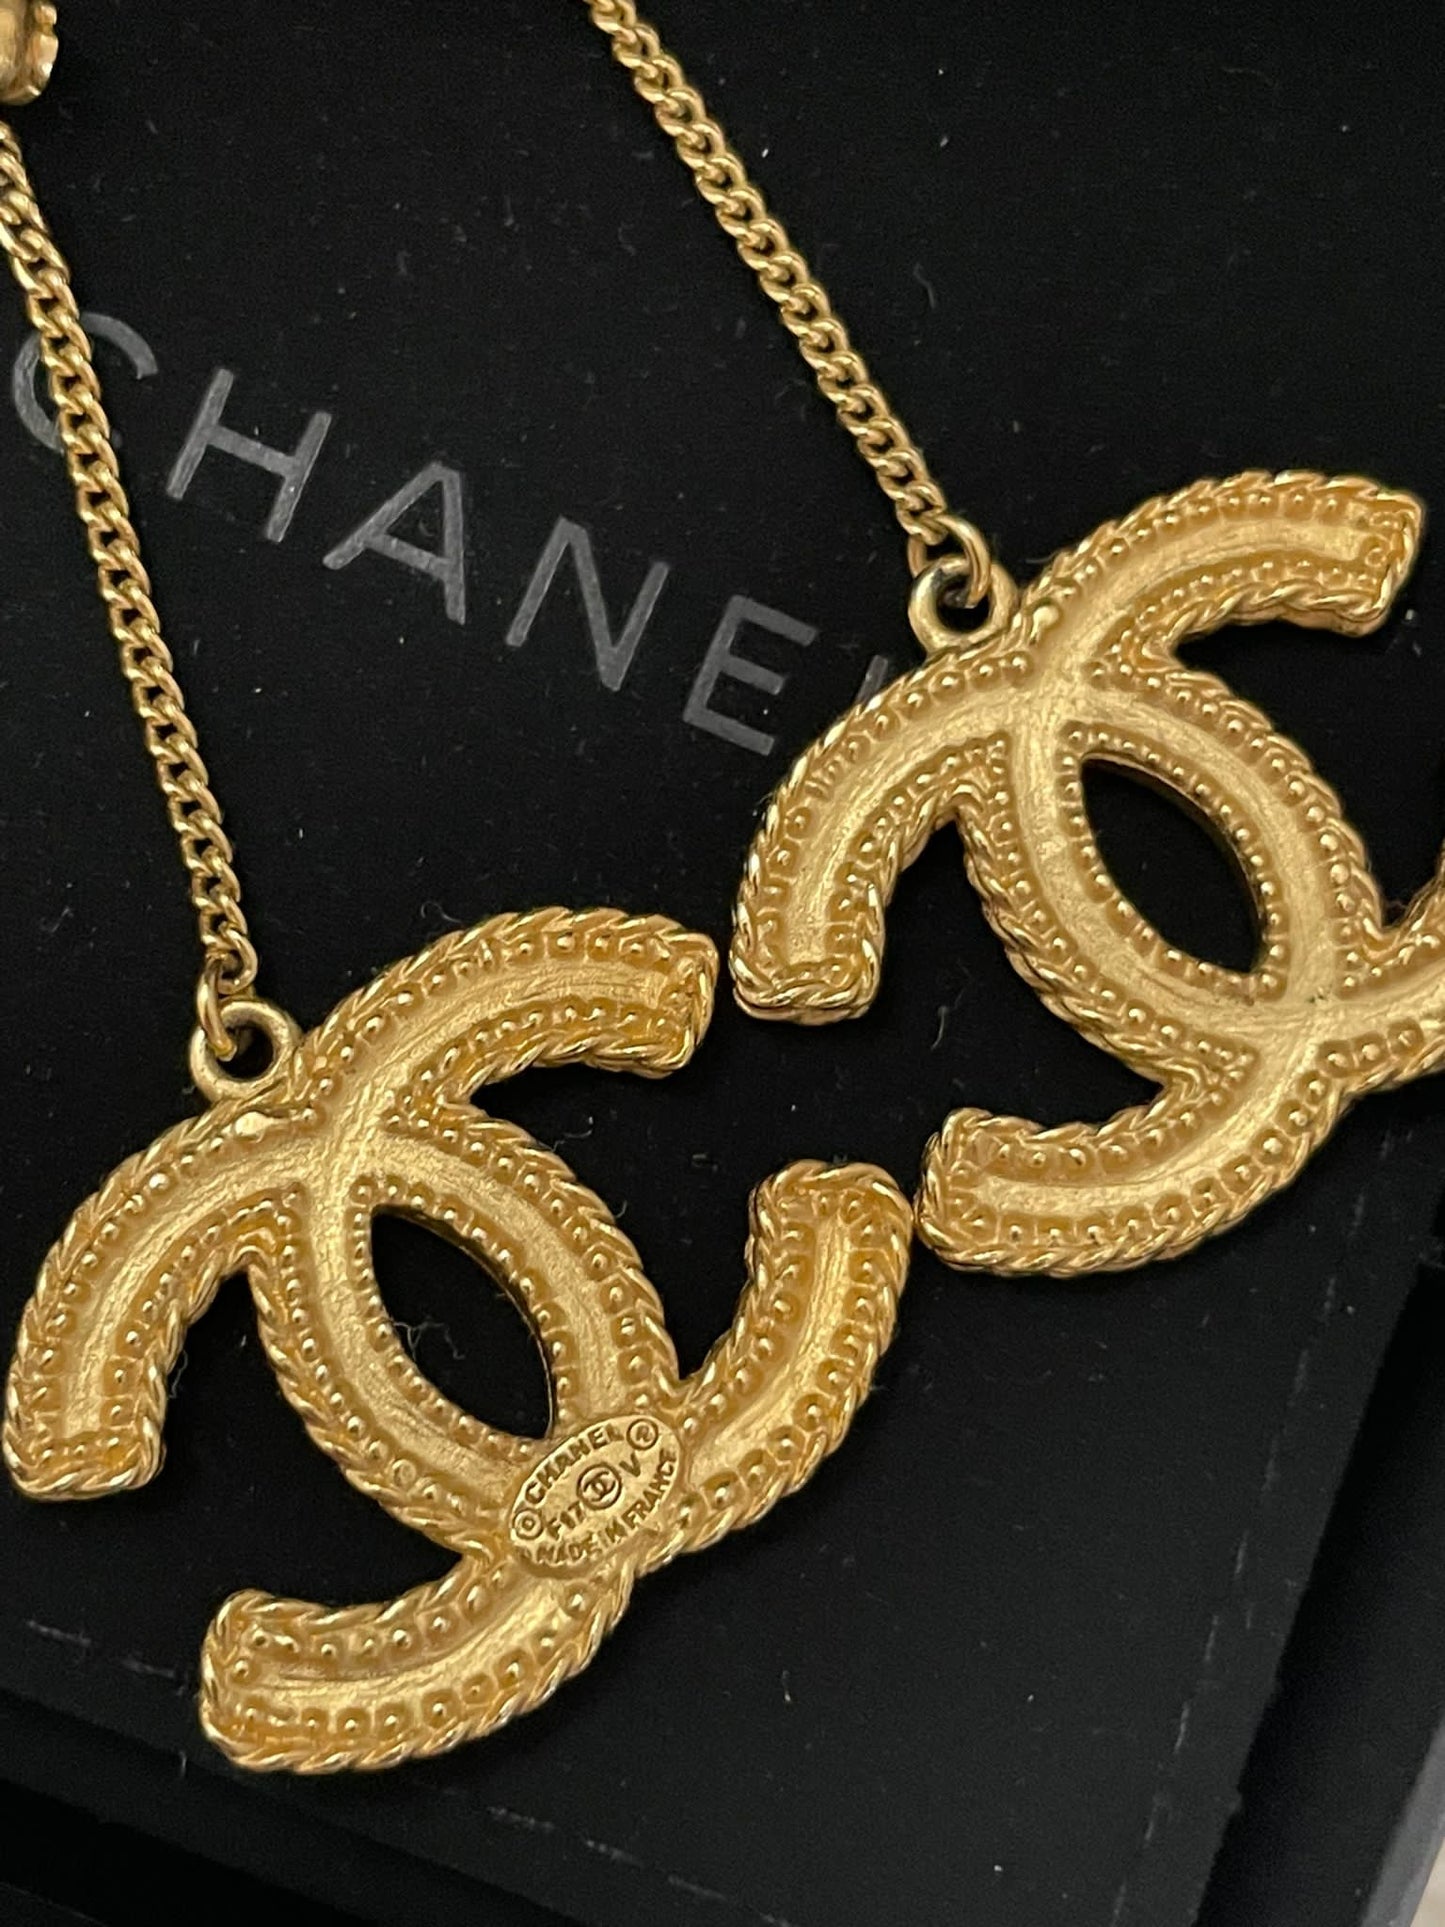 CHANEL Baroque Large CC Dangle Stud Earrings Gold Hardware – AYAINLOVE  CURATED LUXURIES